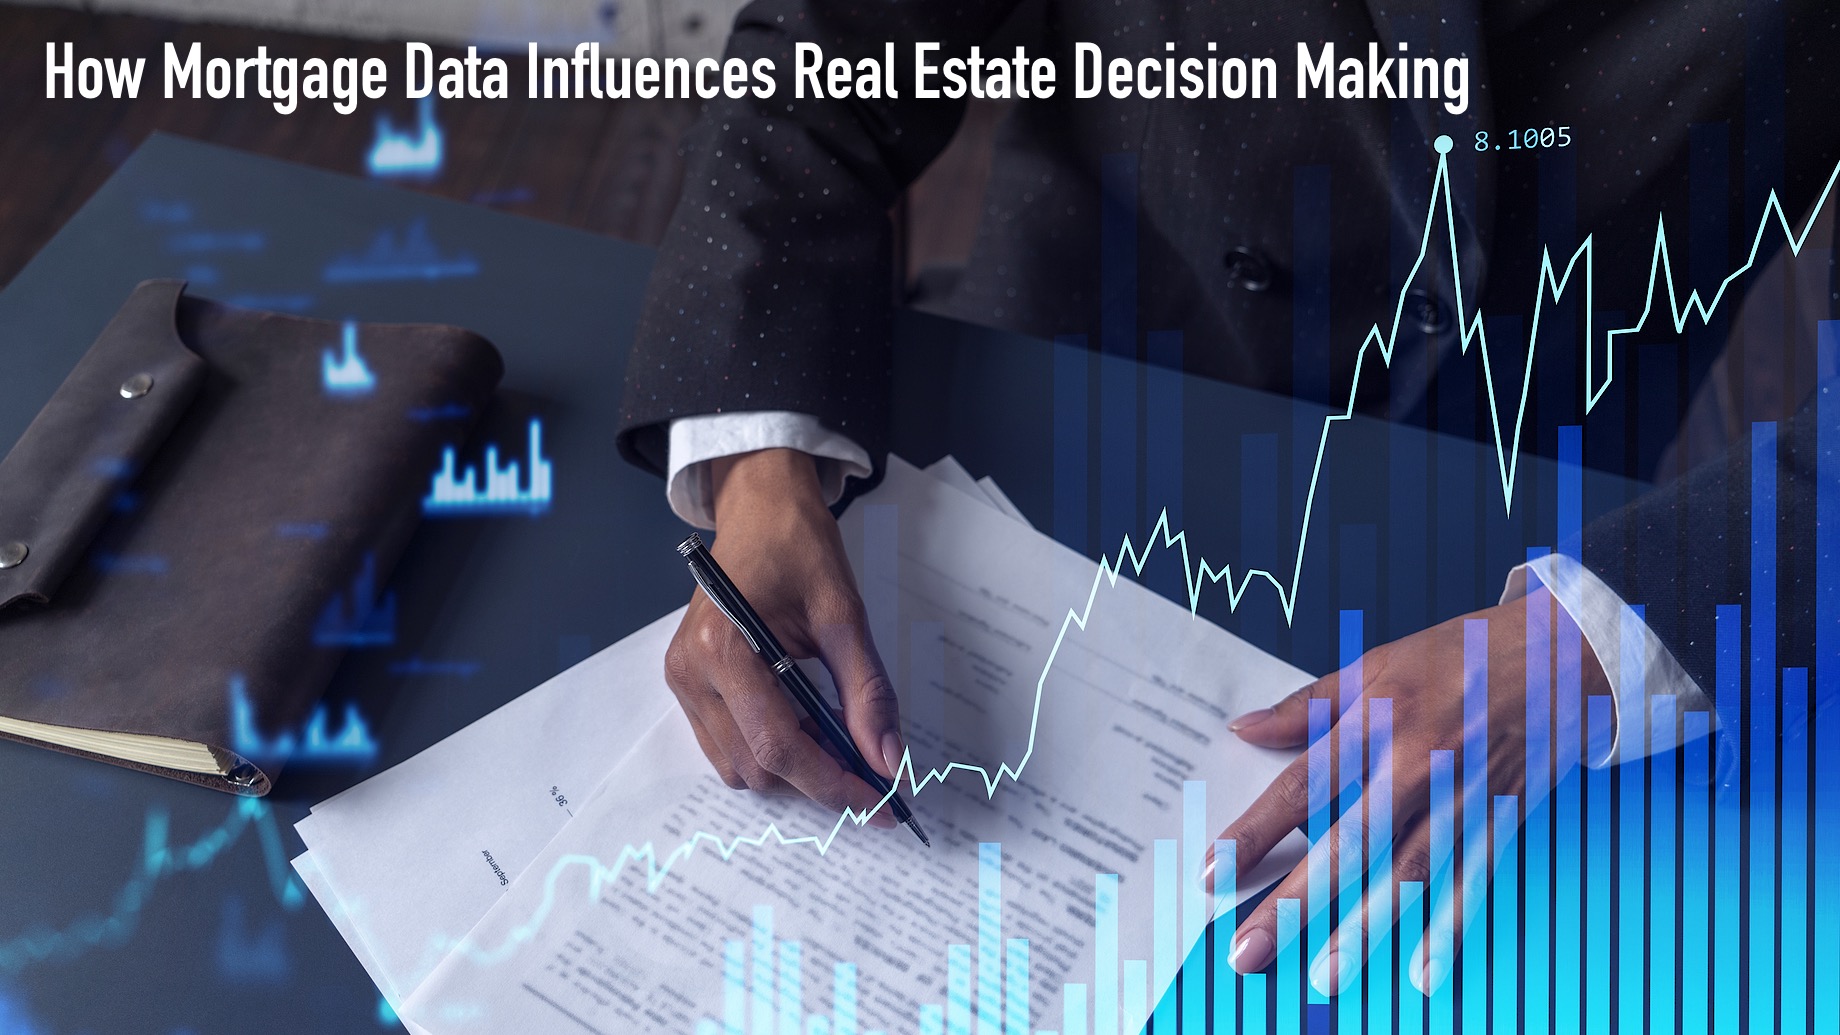 How Mortgage Data Influences Real Estate Decision Making